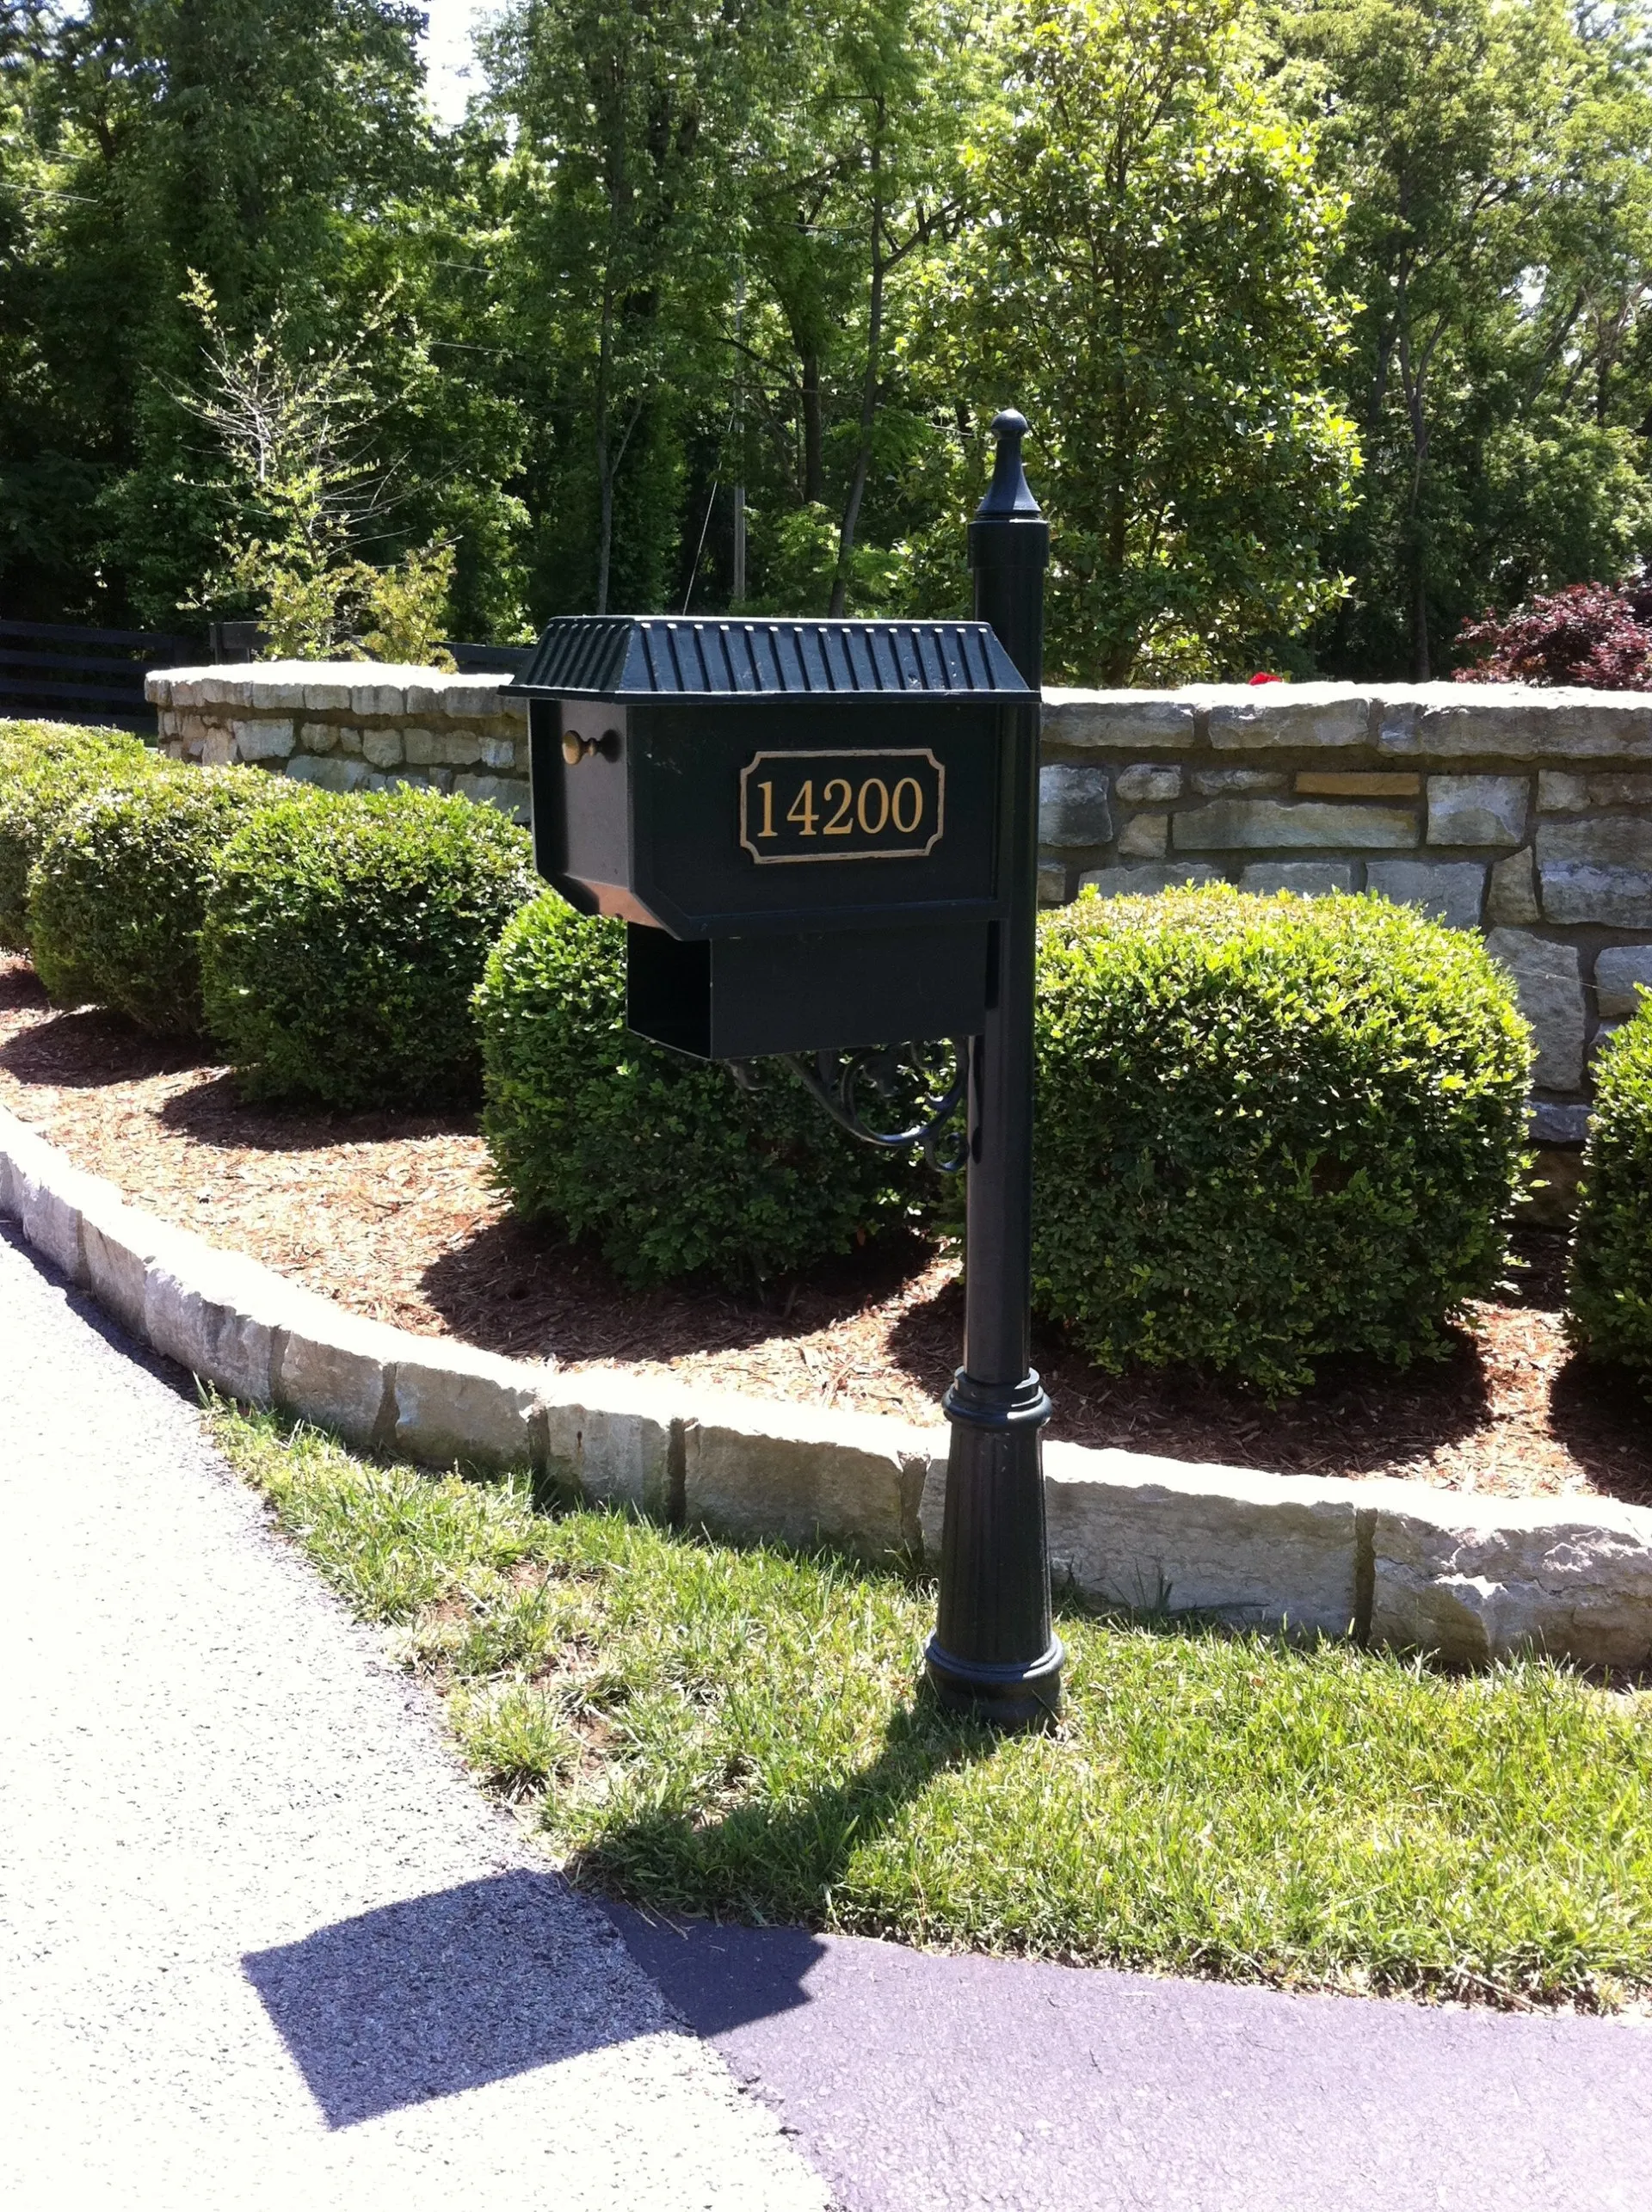 custom mailboxes
mailboxes
residential development
casted mailbox
aluminum mailbox
paper box